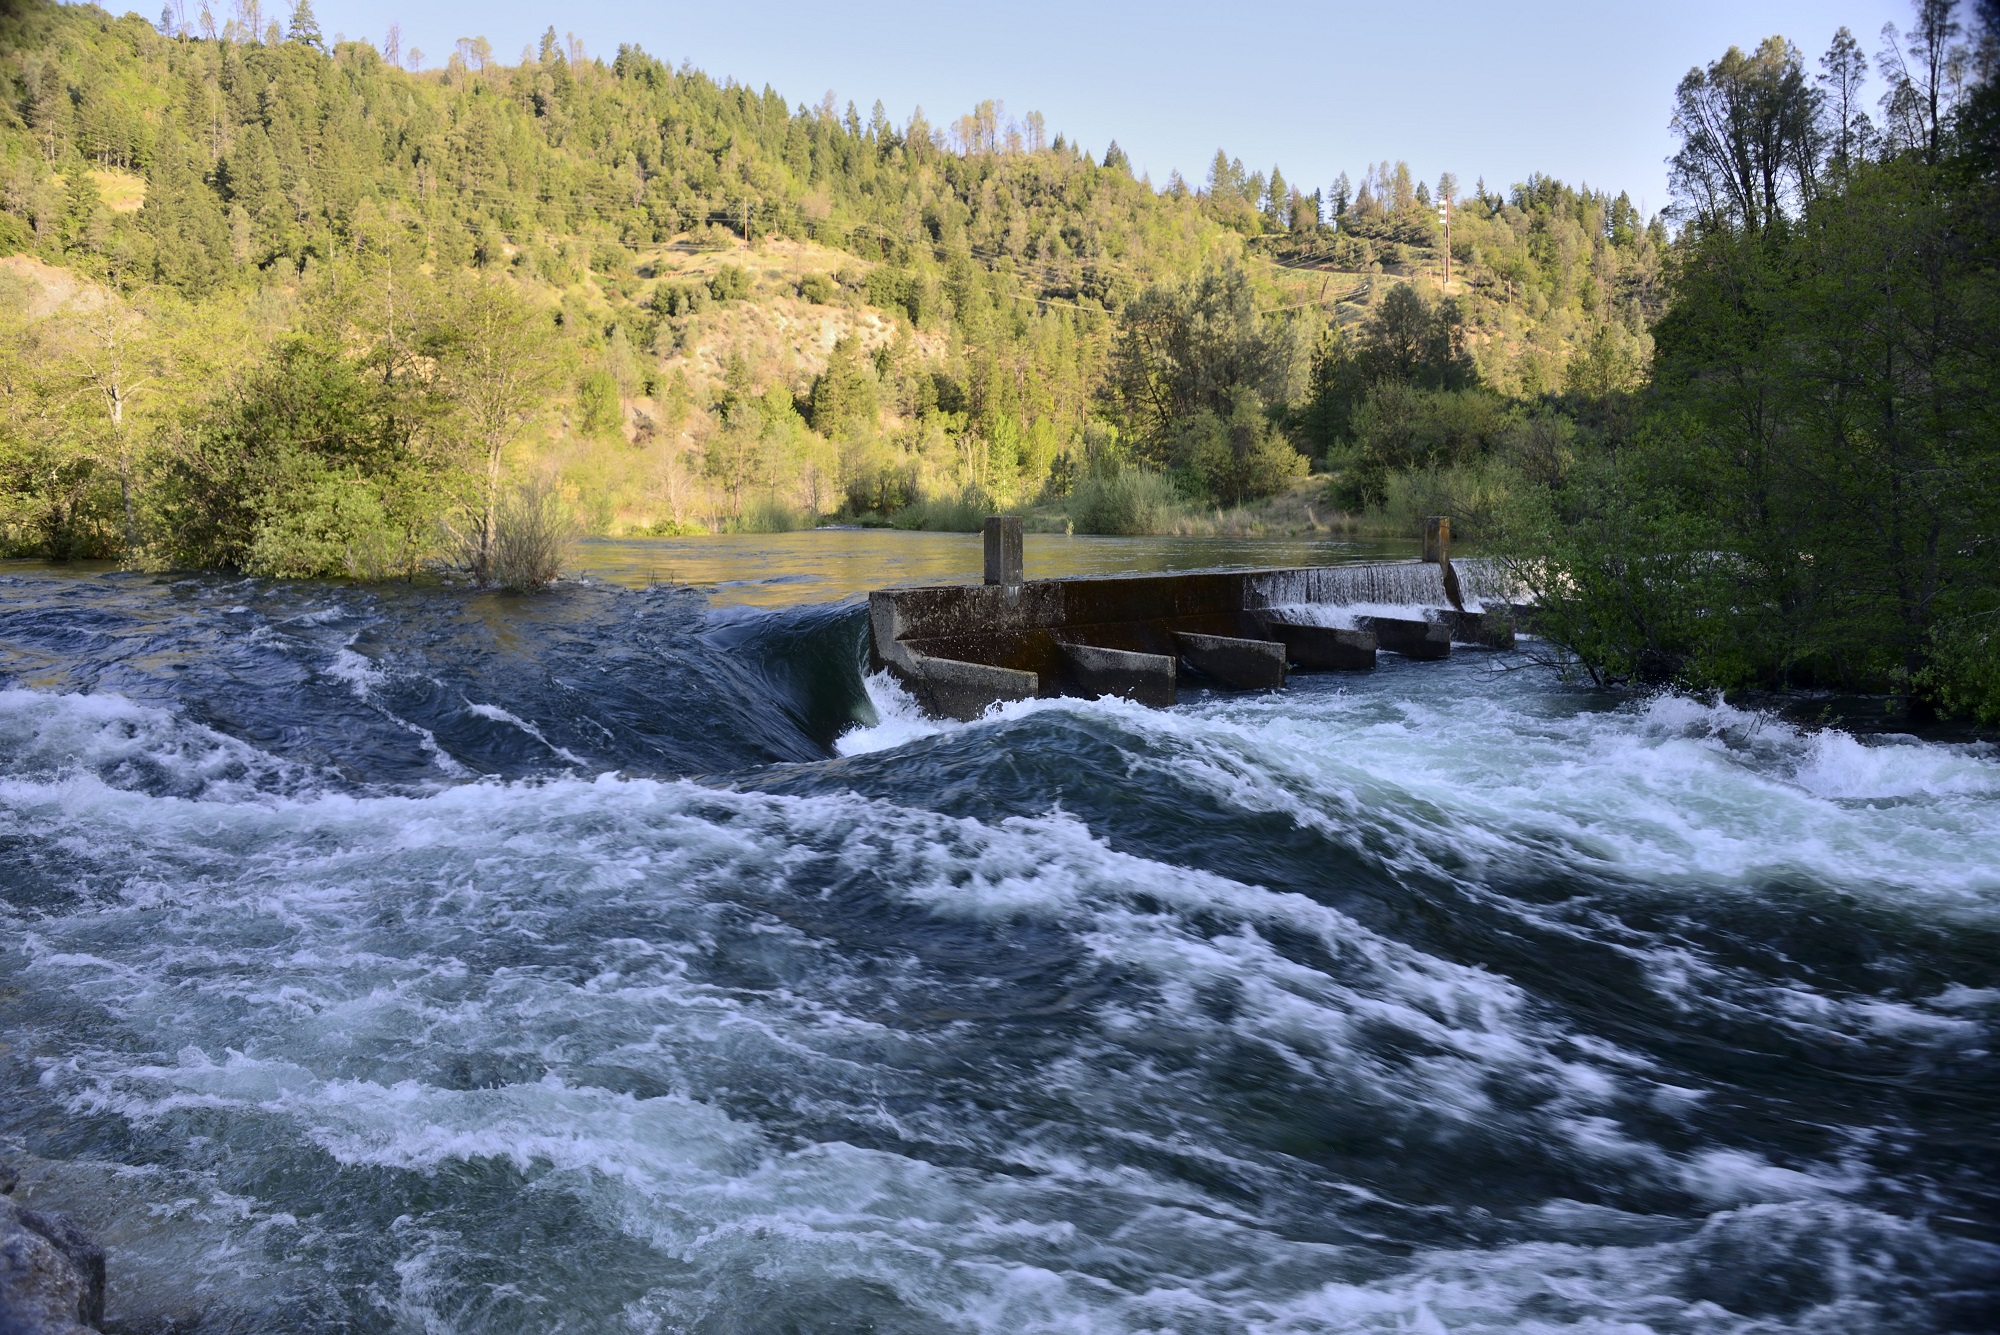 Trinity River flows in the summer of 2014 at the weir near Lewiston, CA. Photo by Kenneth DeCamp